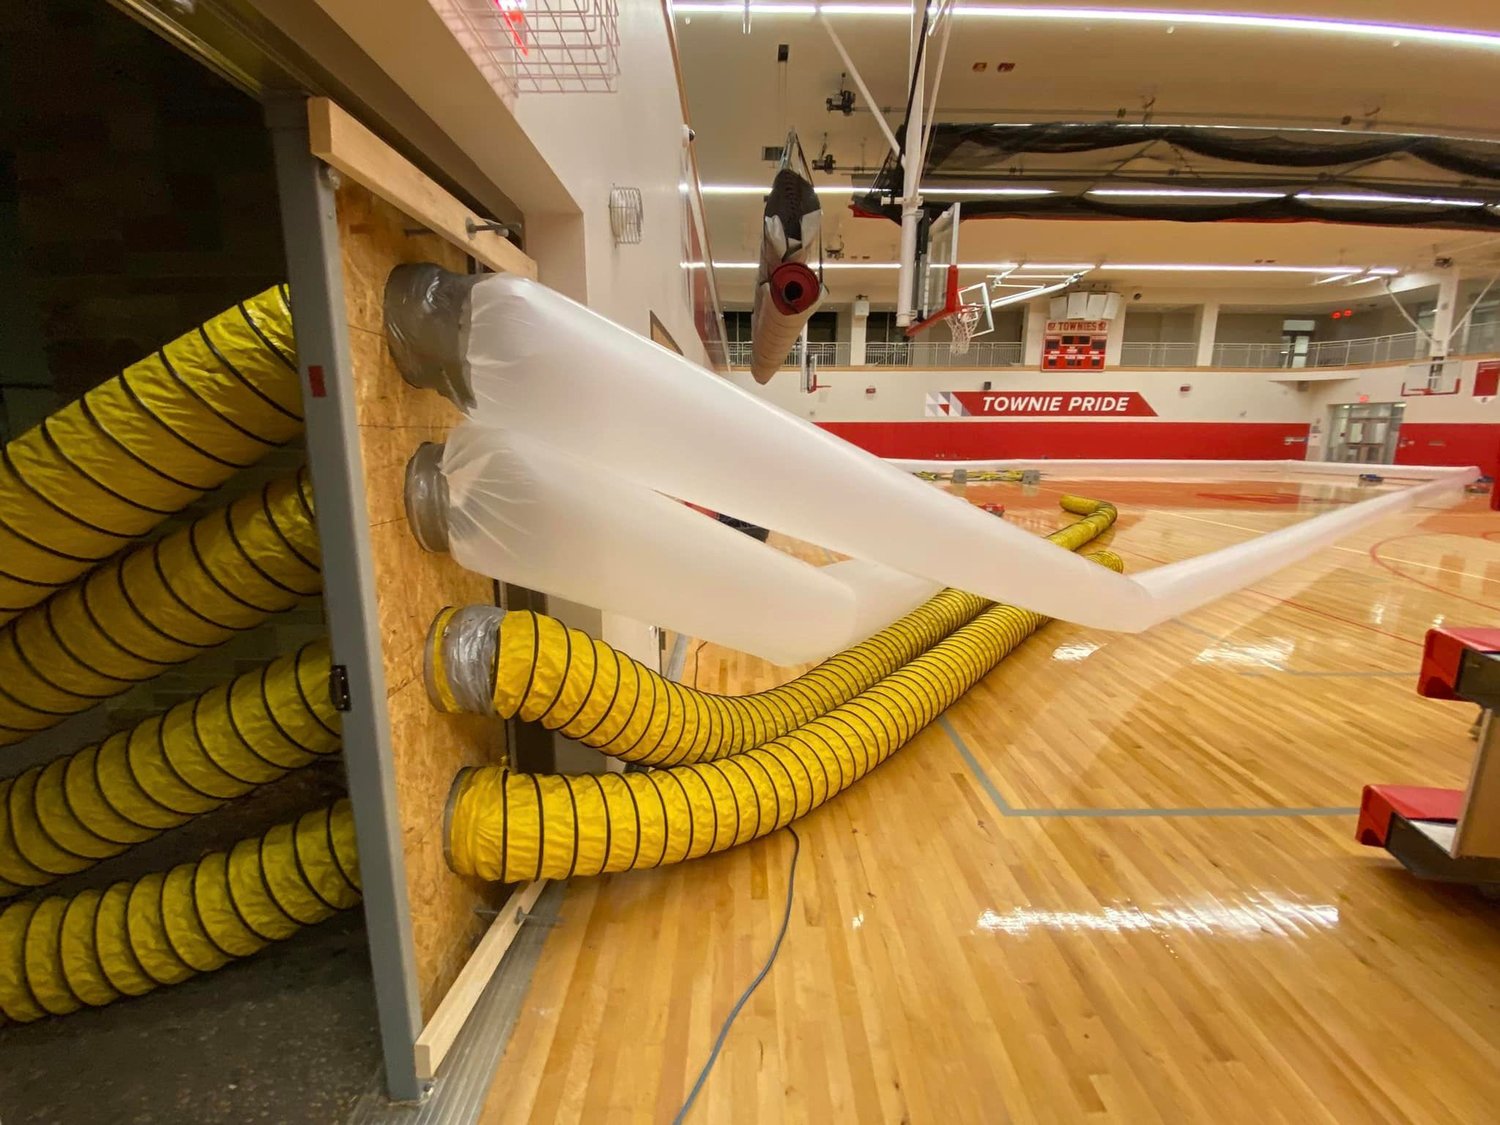 A translucent plastic tube was used by Clean Care New England to pump heated air into the gym from a large generator located just outside to aid in the evaporation efforts.